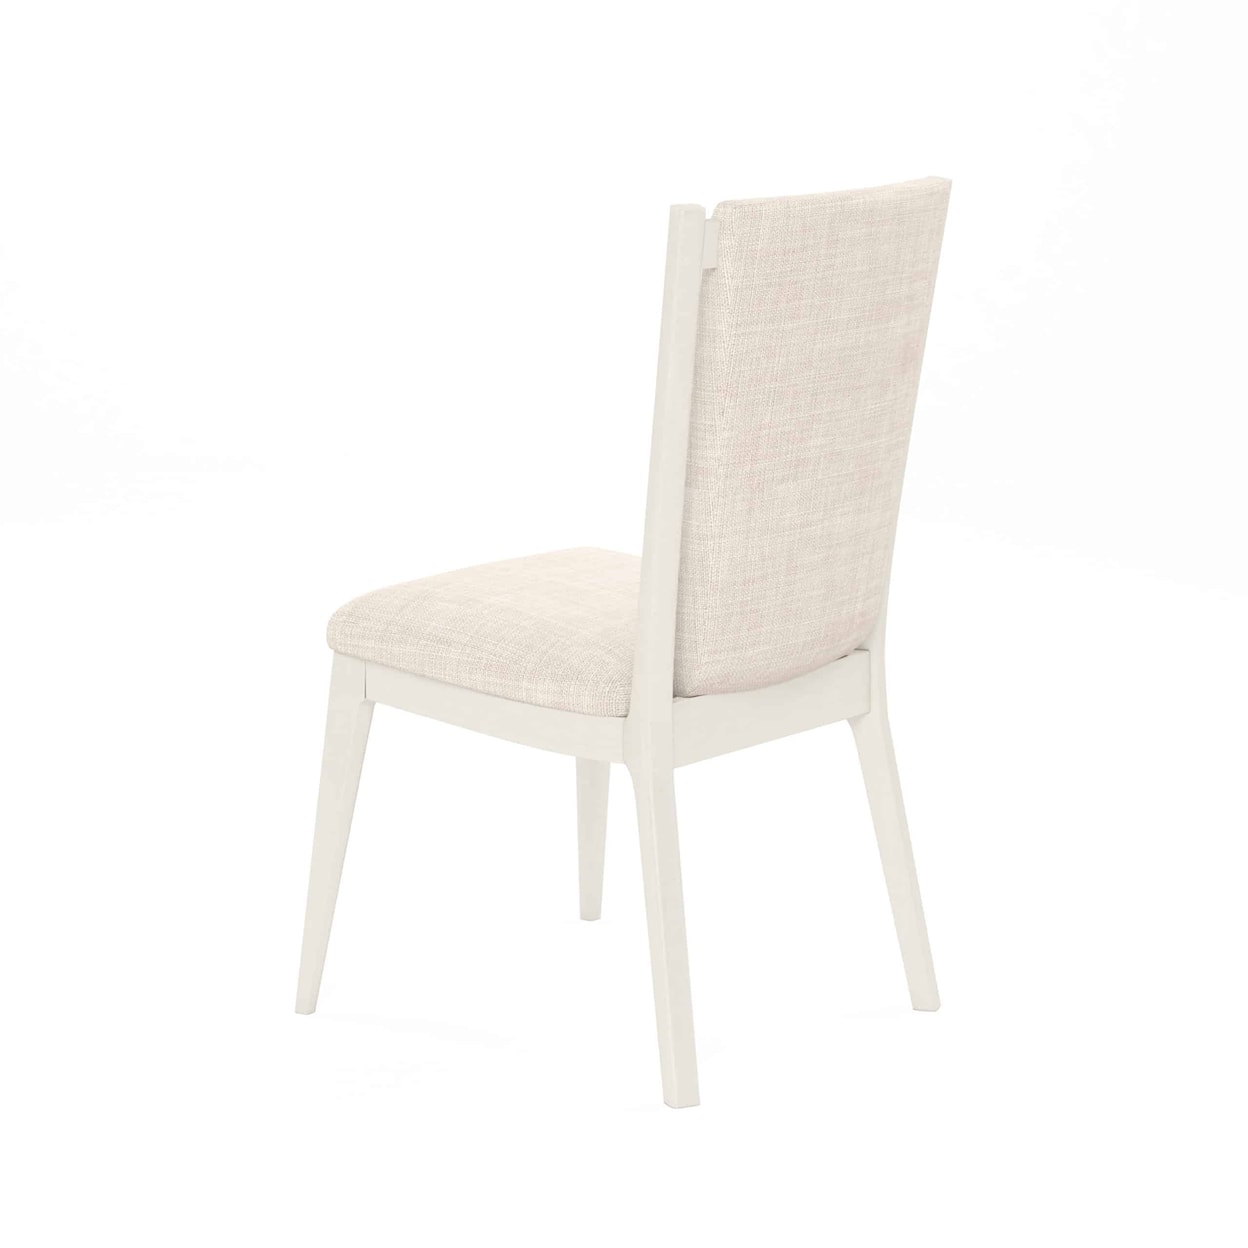 A.R.T. Furniture Inc Blanc Upholstered Side Chair